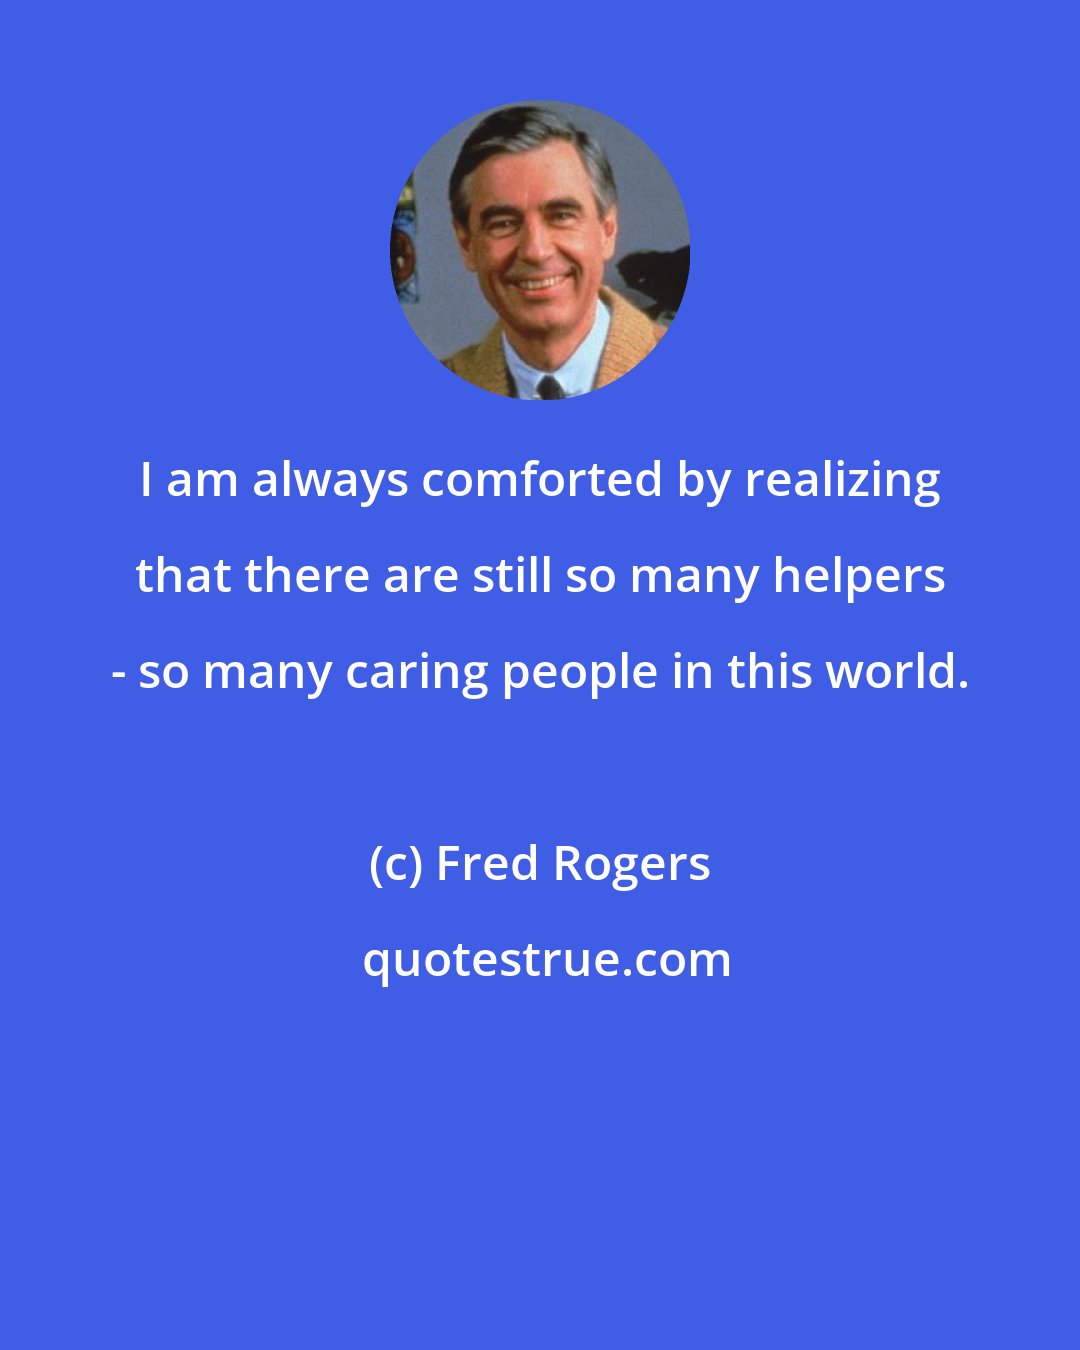 Fred Rogers: I am always comforted by realizing that there are still so many helpers - so many caring people in this world.